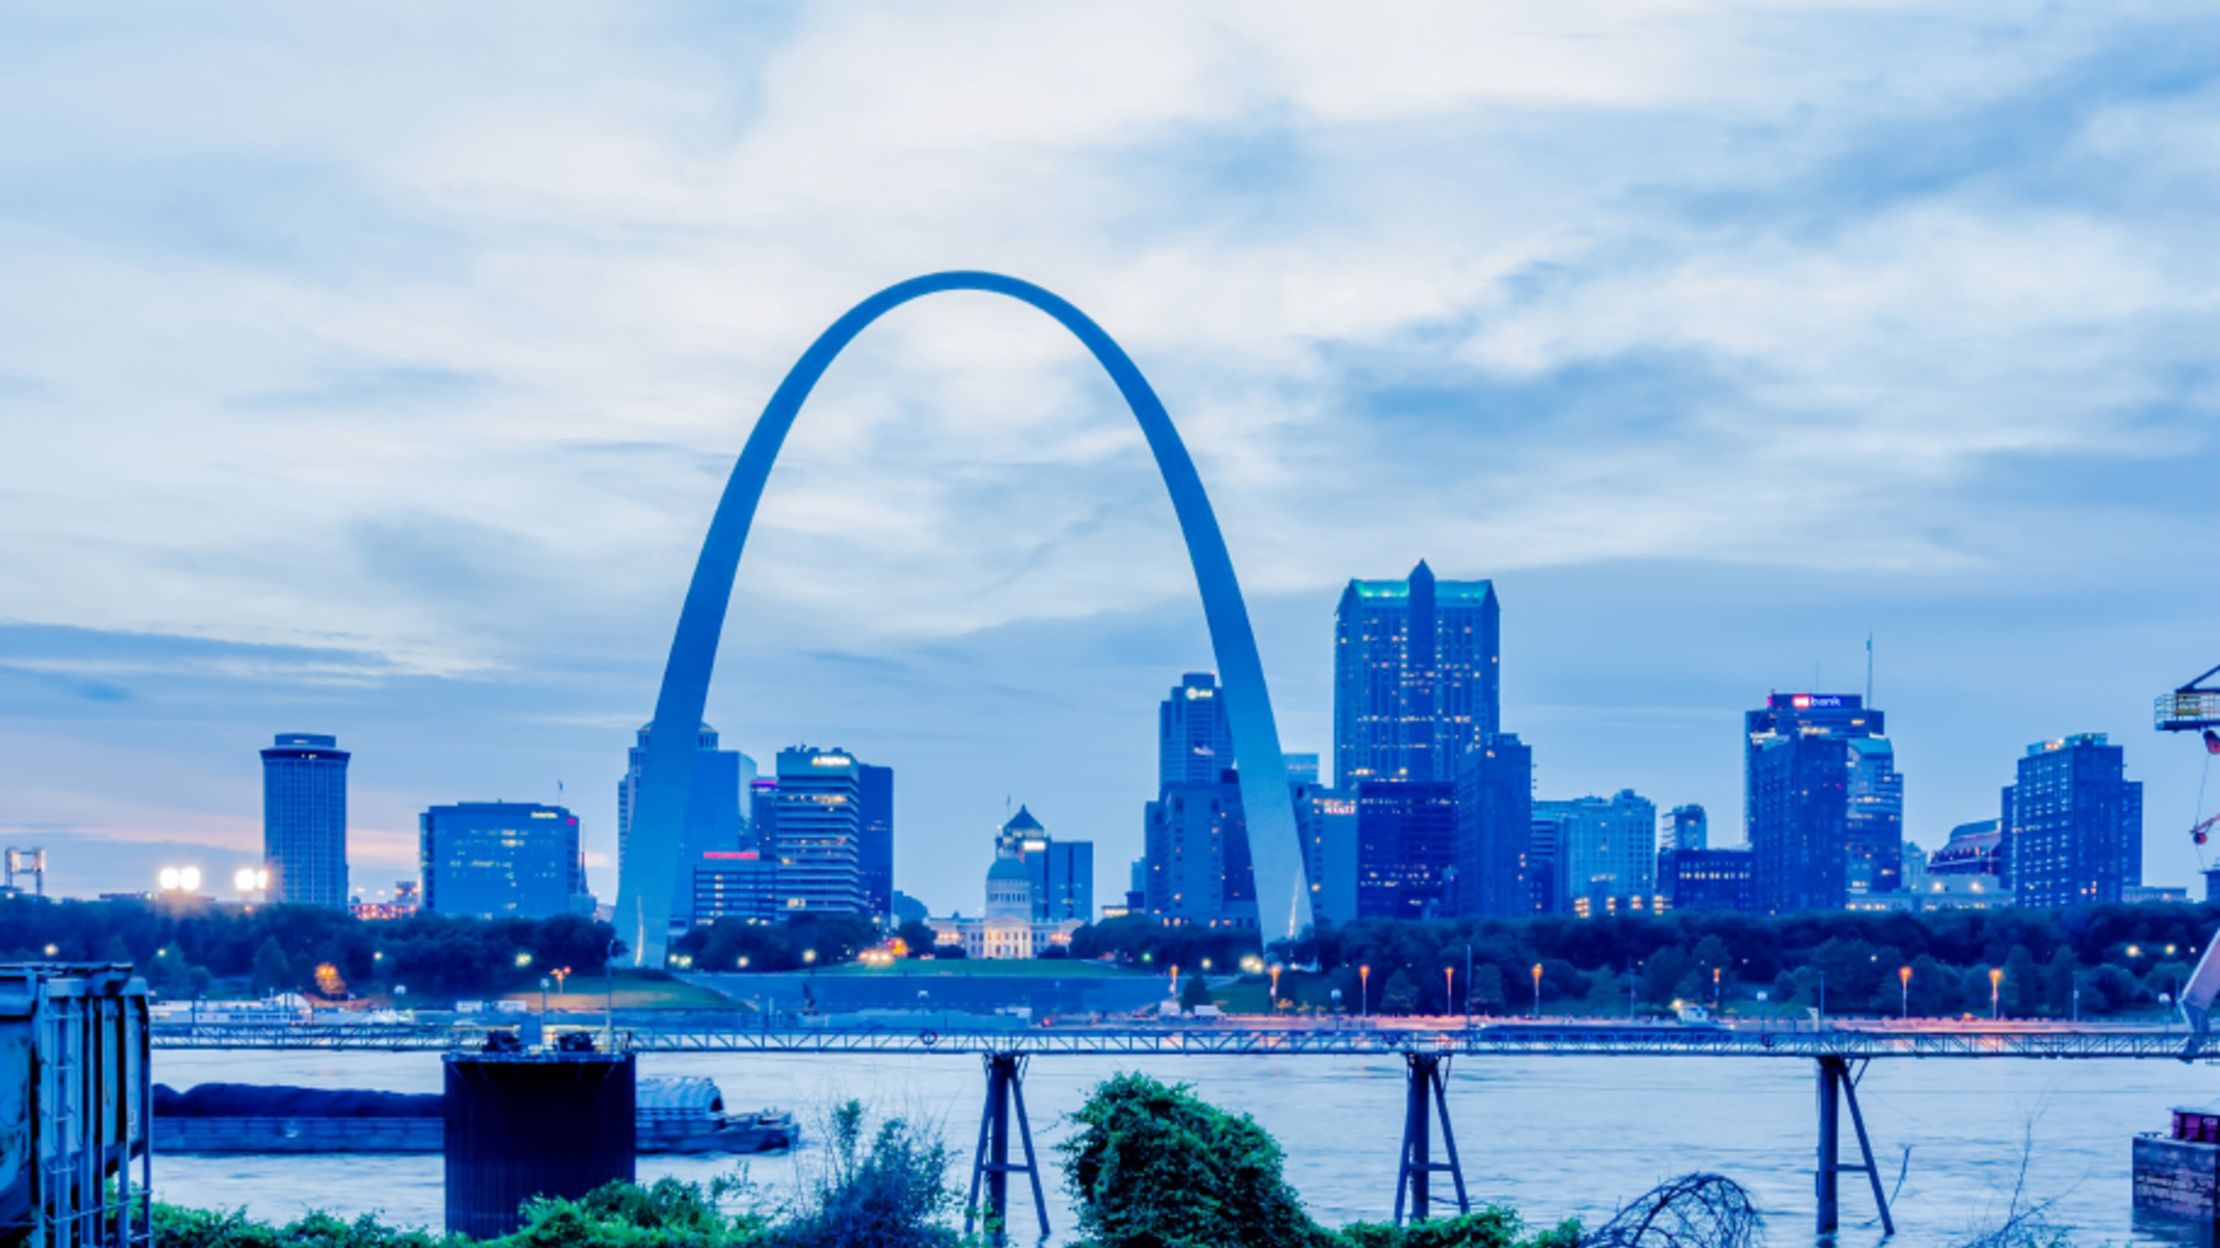 15 Things You May Not Know About the Gateway Arch | Mental Floss